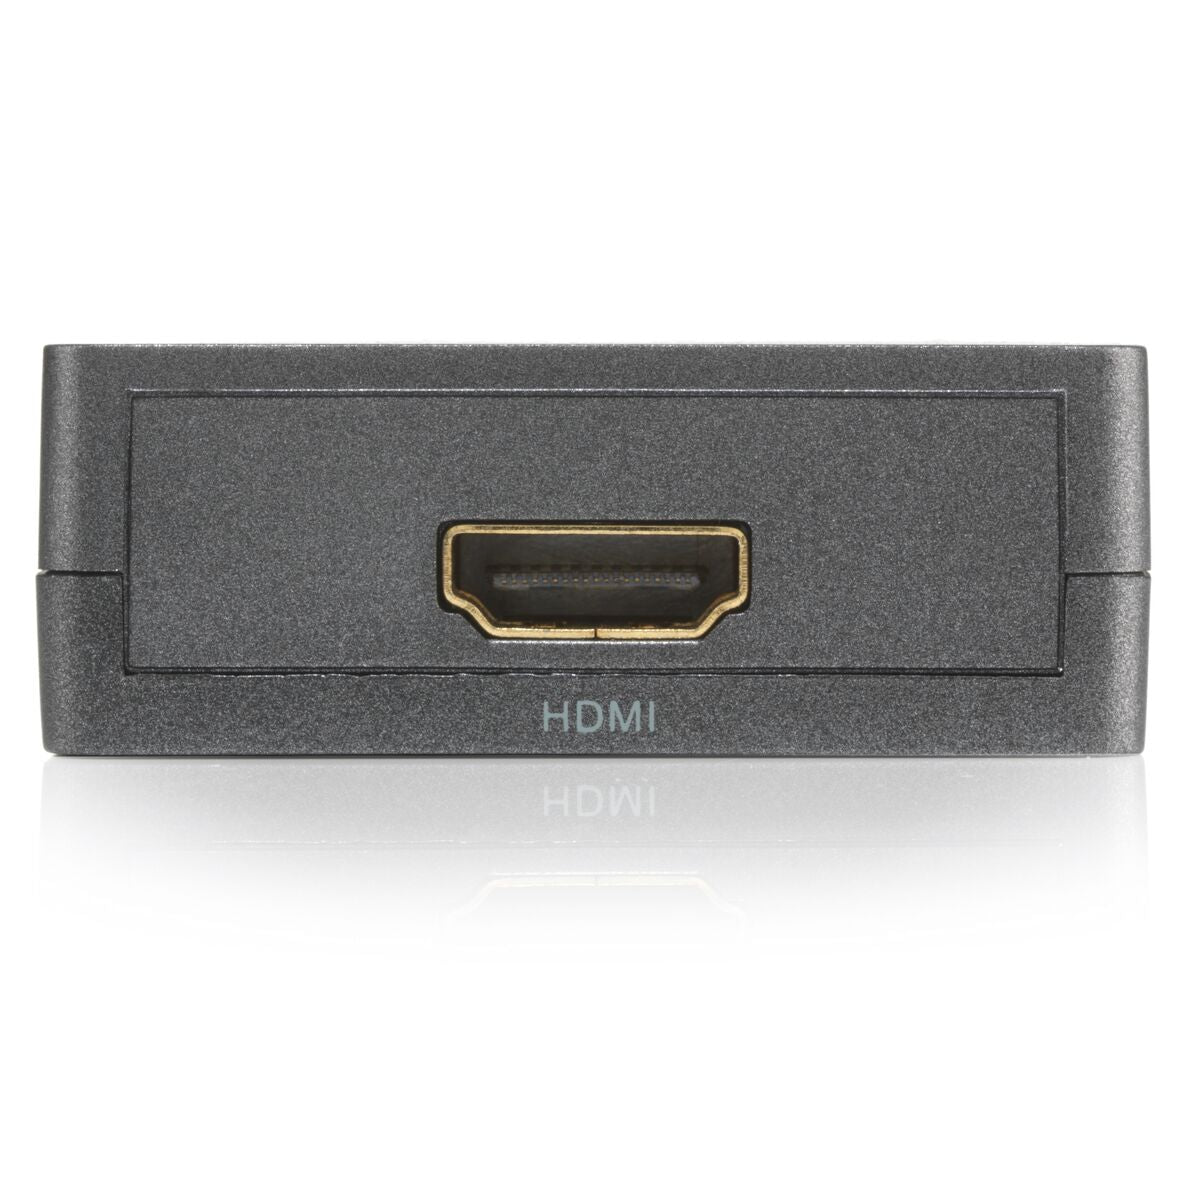 Connect HV15 - HDMI to VGA adapter - HDMI Output Connection Image | Marmitek